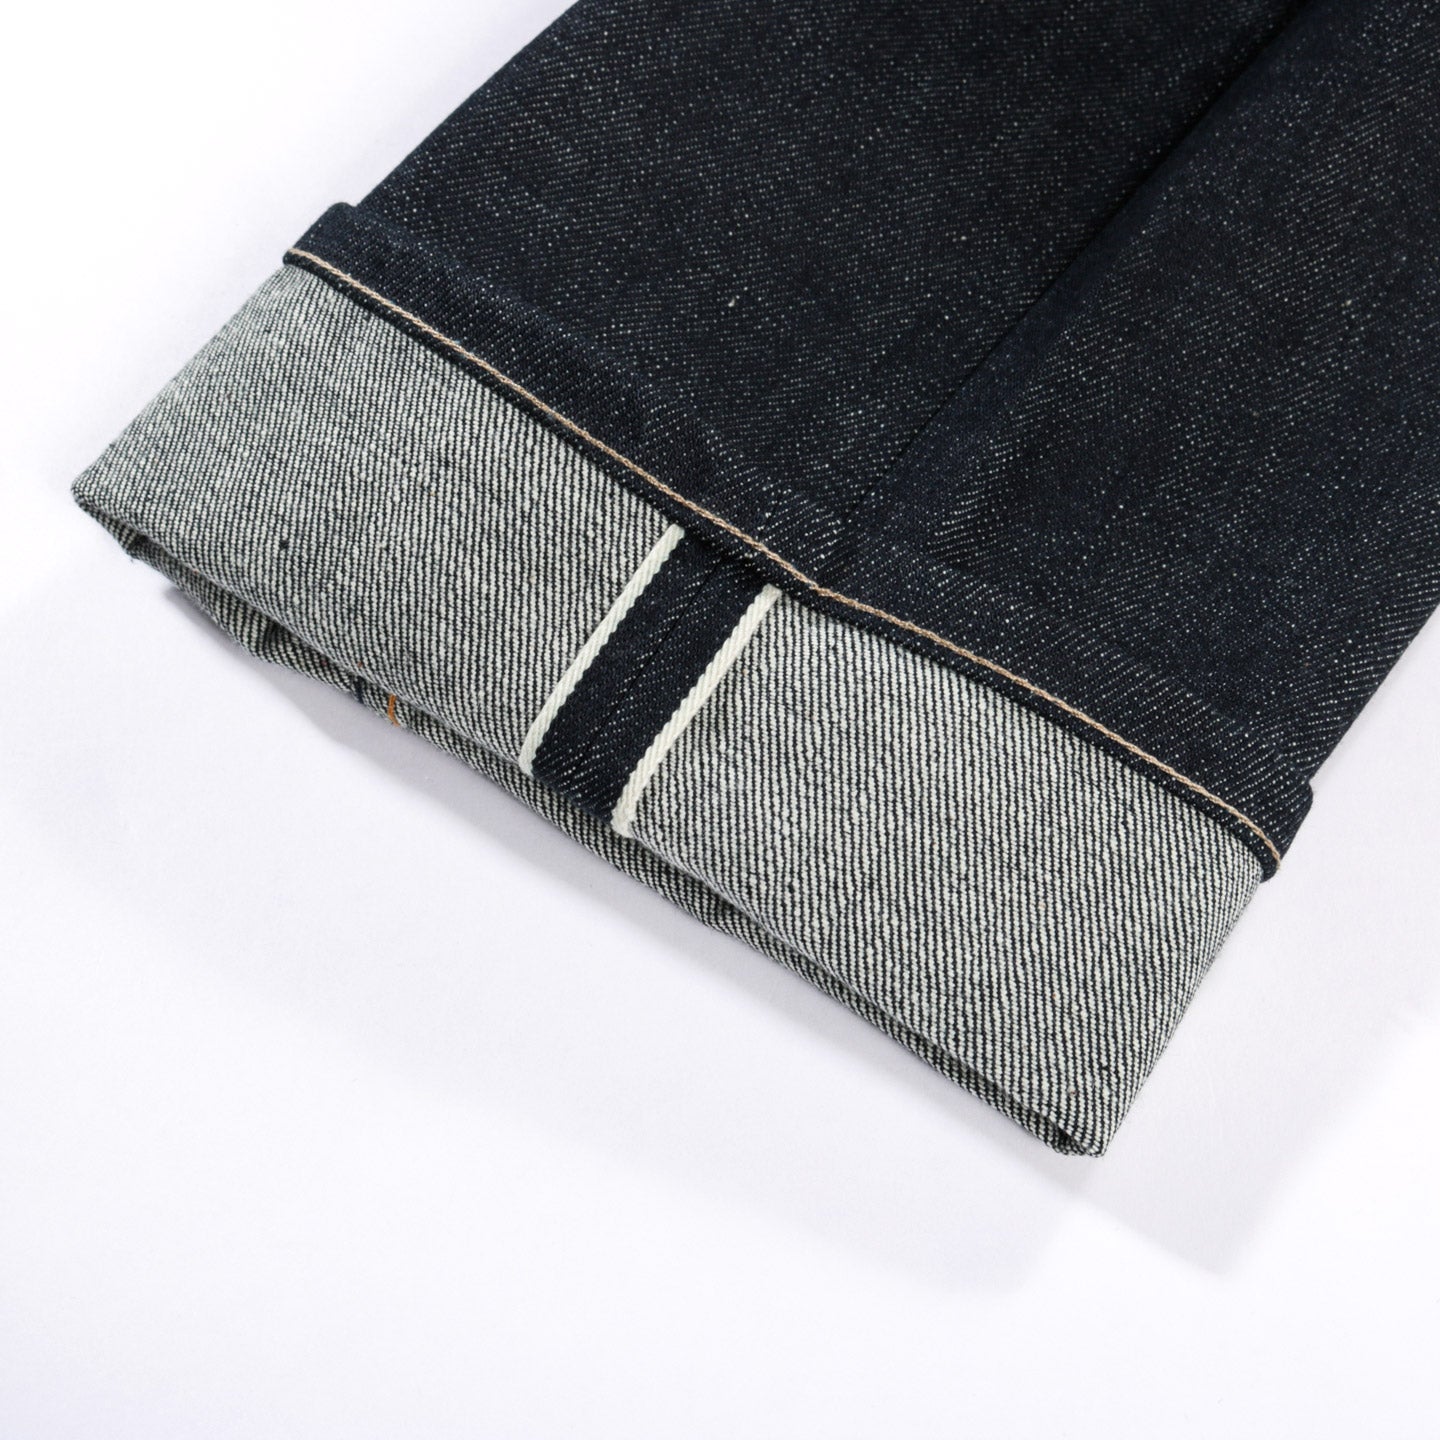 LEE 101Z GREEN CAST SELVAGE DRY